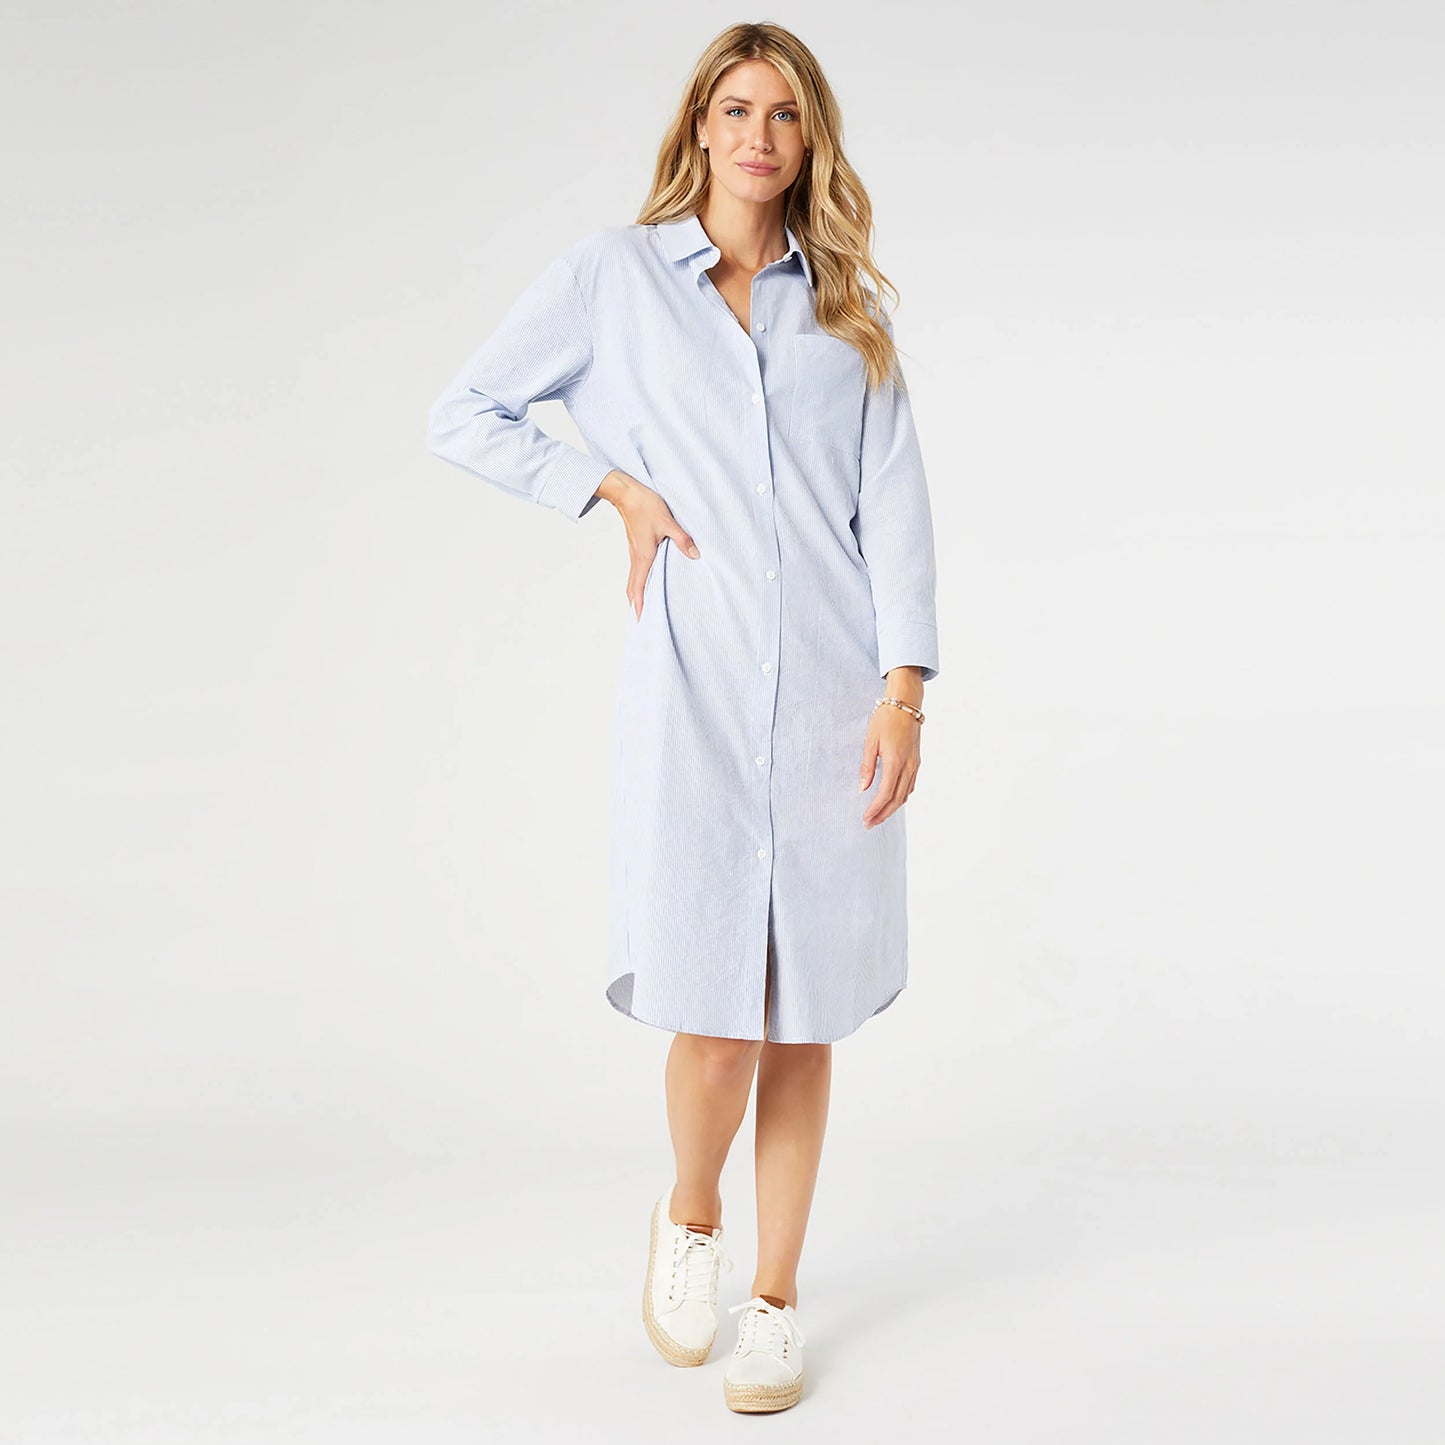 Brenna Button-up Maxi Dress/Blue and White